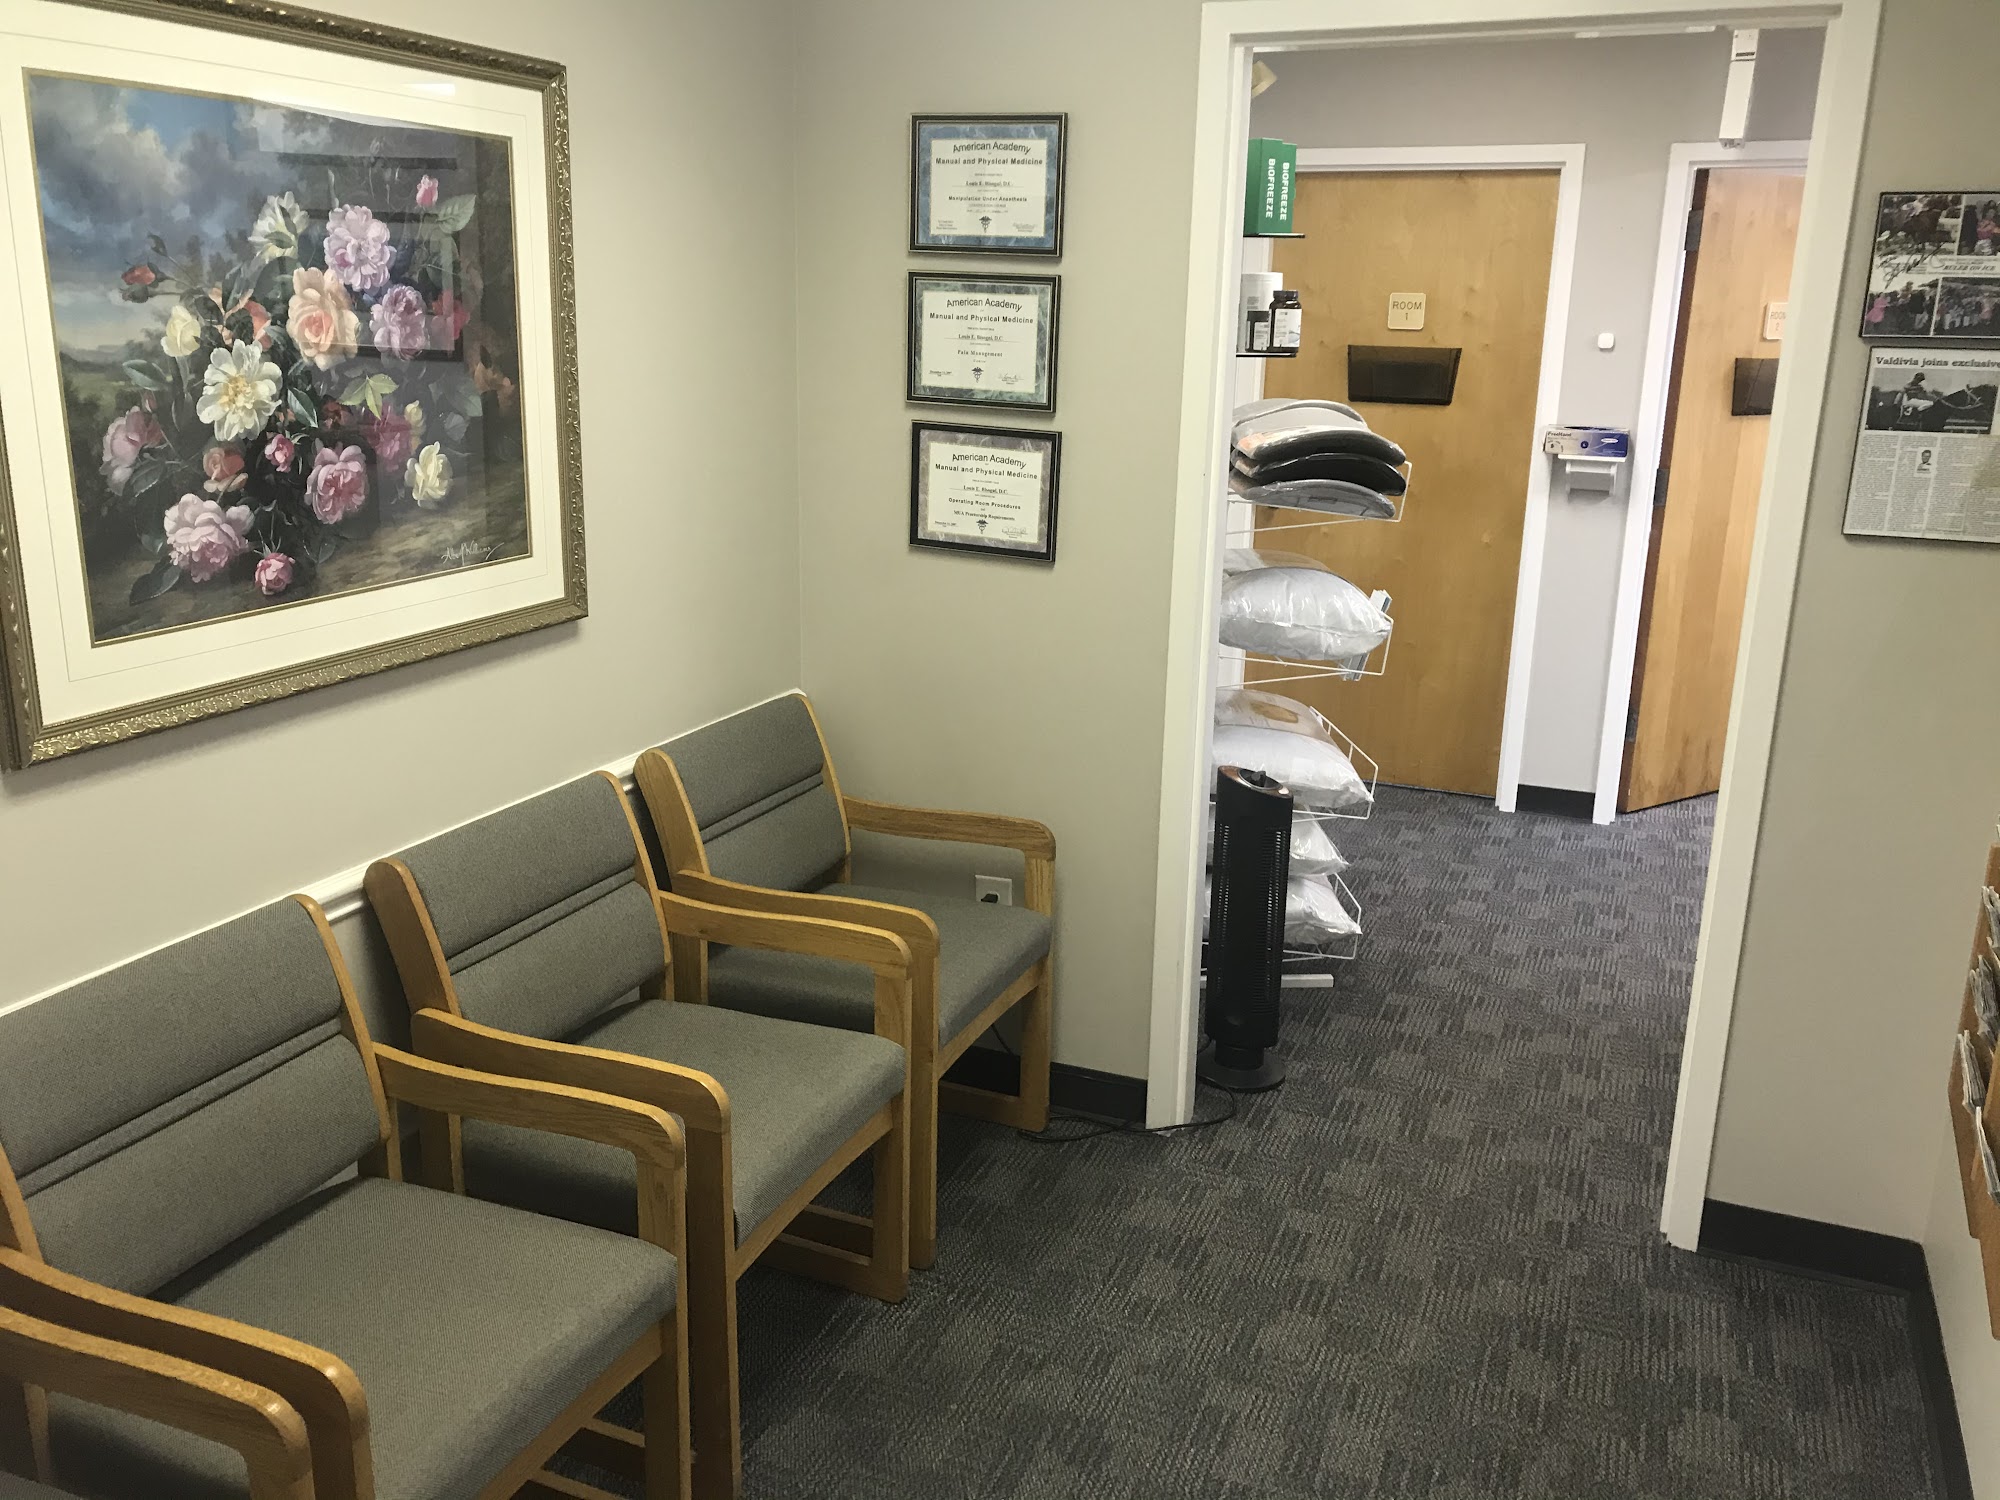 Bisogni Chiropractic - Somers Chiropractor 332 NY-100, Somers New York 10589